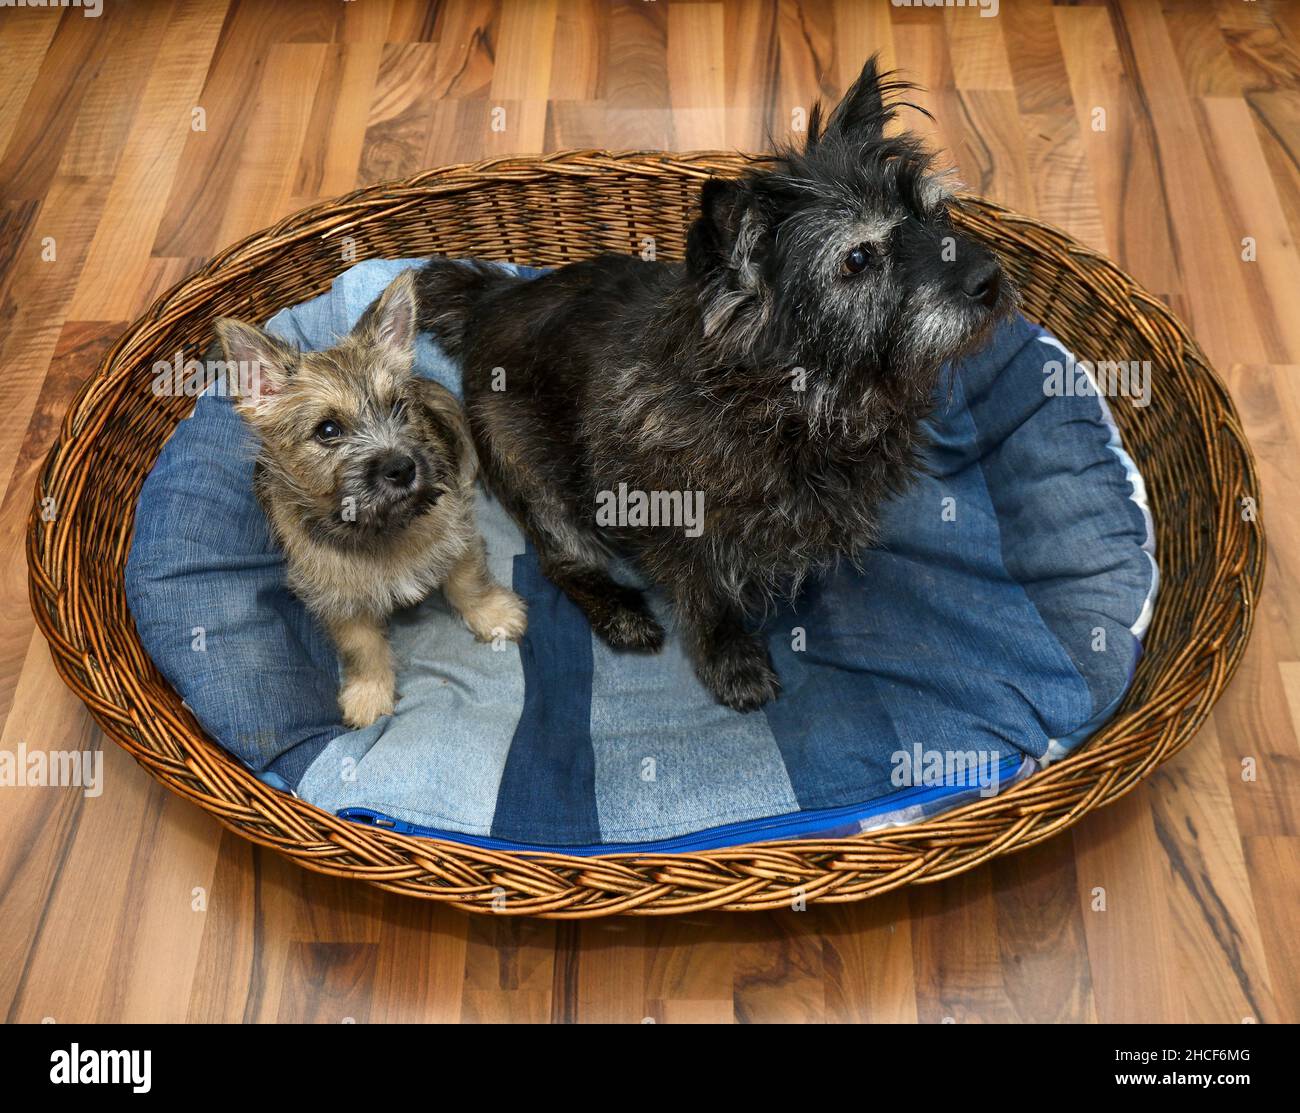 an elderly dog Cairn Terrier and a Cairn Terrier cute puppy are sitting in the same basket Stock Photo